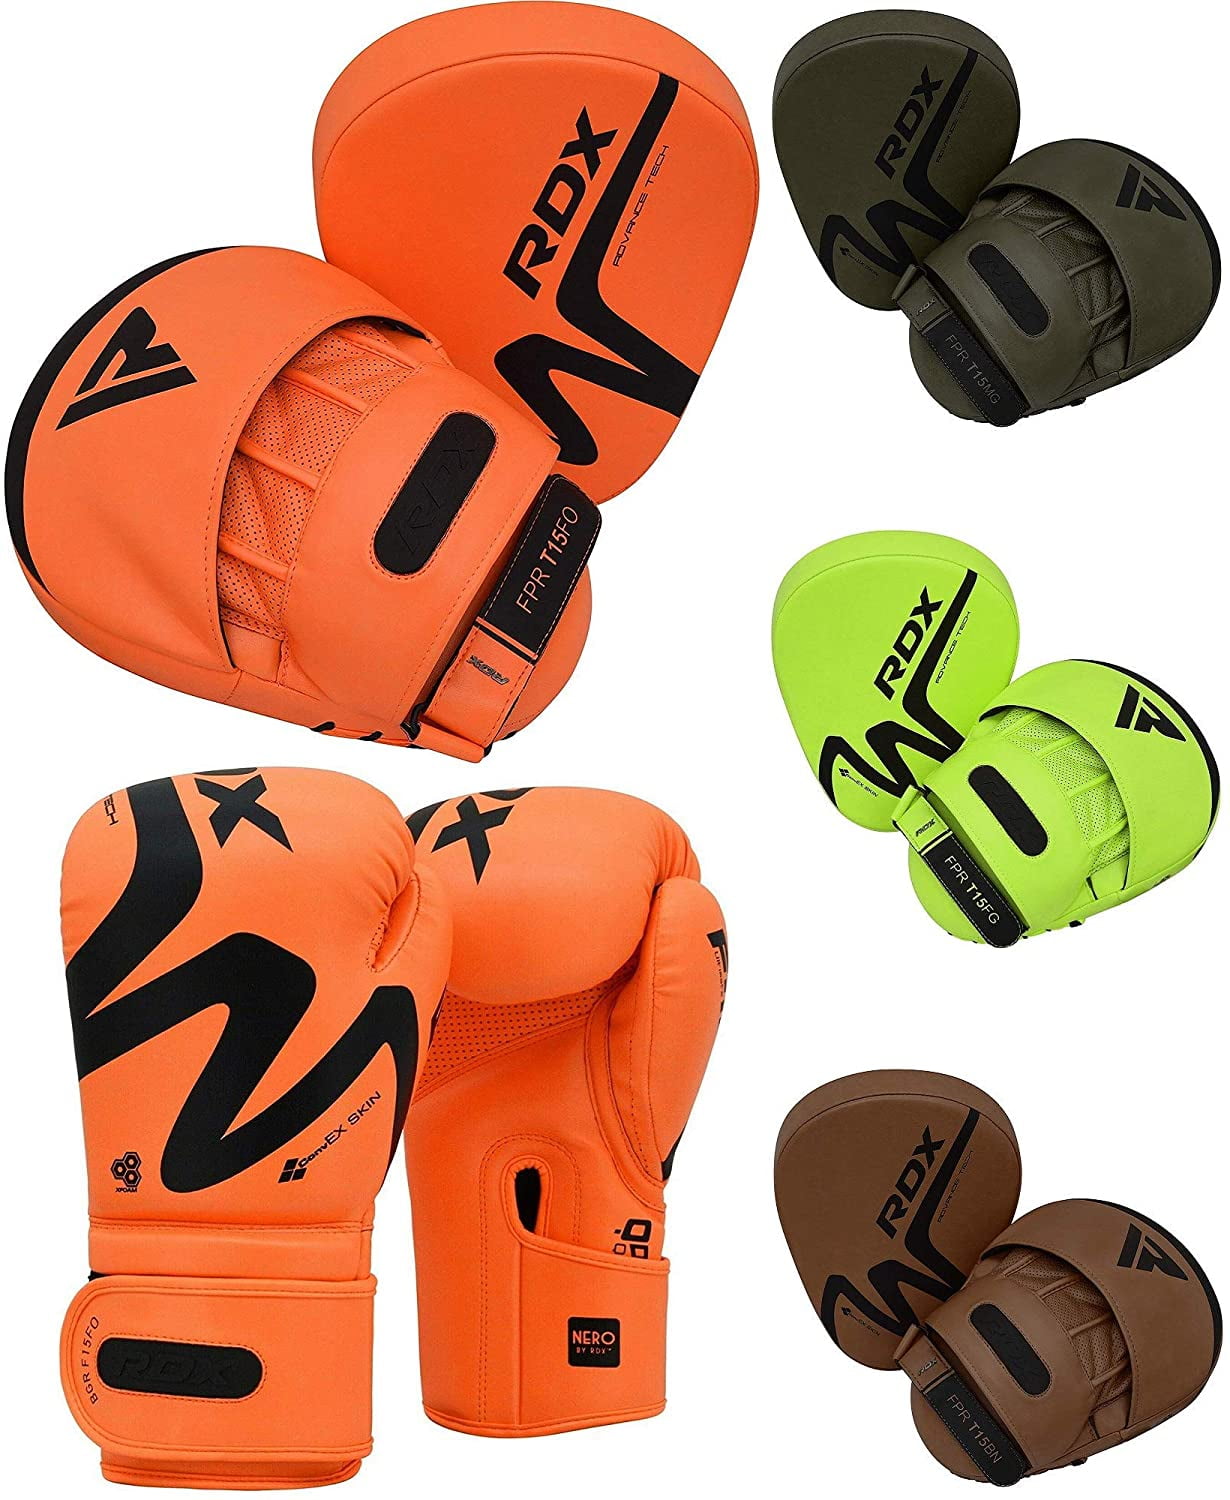 Karate Hook and Jab Target Mitts with Punching Gloves Martial Arts RDX Boxing Pads and Gloves Set Padded Coaching Strike Shield MMA Training Hand Pads for Muay Thai Kickboxing 